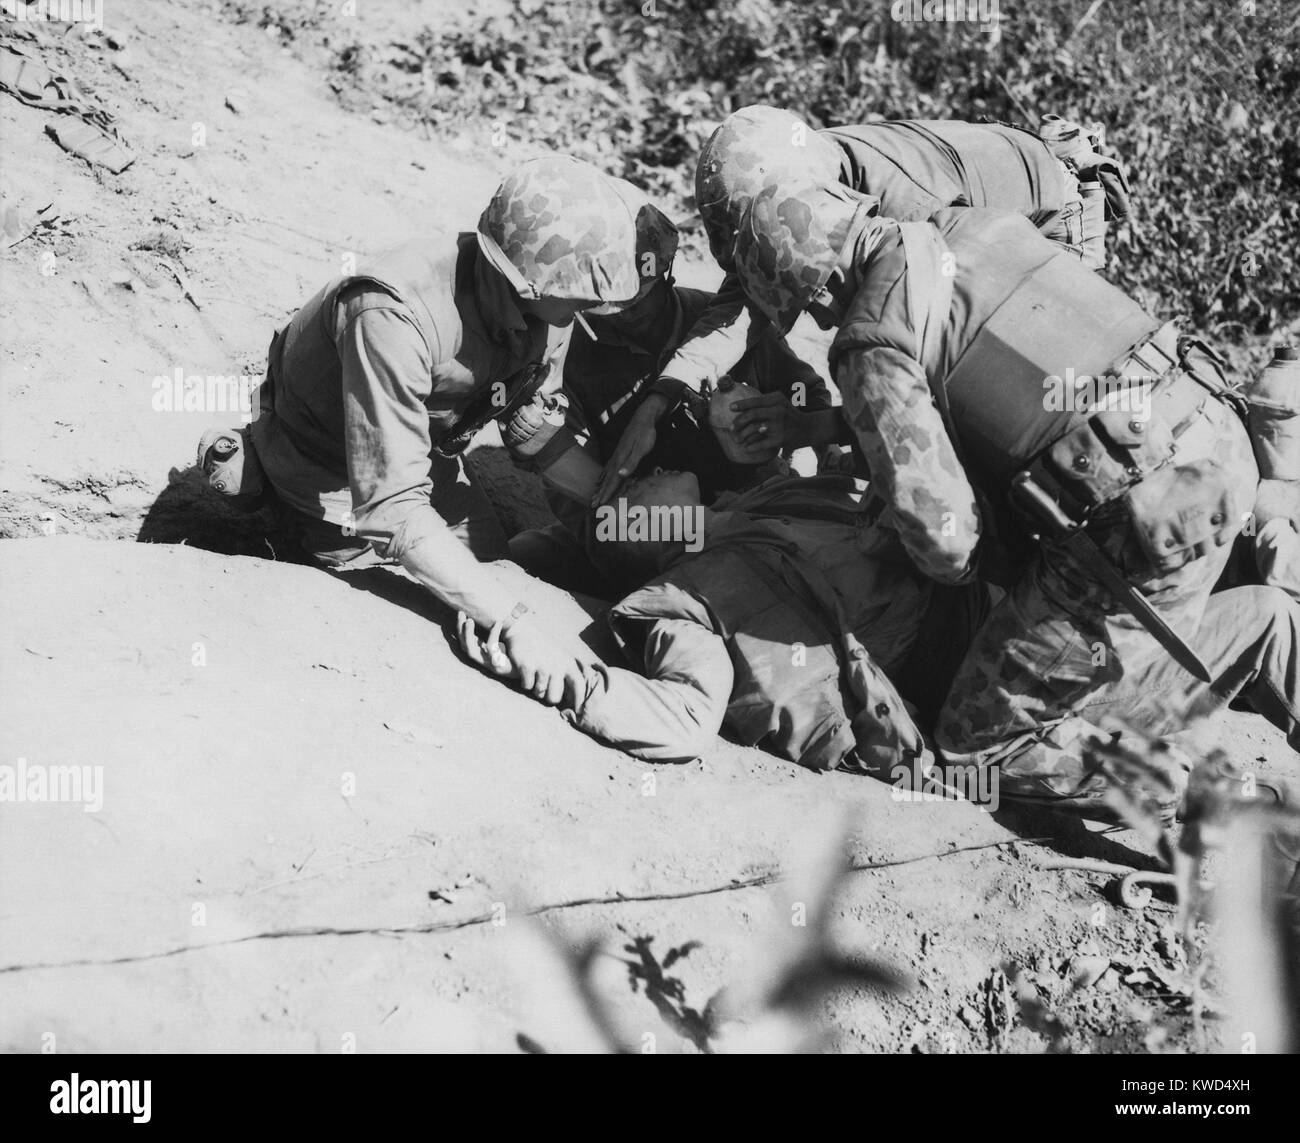 U.S. Marine wounded on Hook Ridge, May 28–29, 1953. In the last months before the armistice was signed, Communists troops renewed bitter fighting to gain final ground and victory claims. Korean War, 1950-53. (BSLOC 2014 11 126) Stock Photo